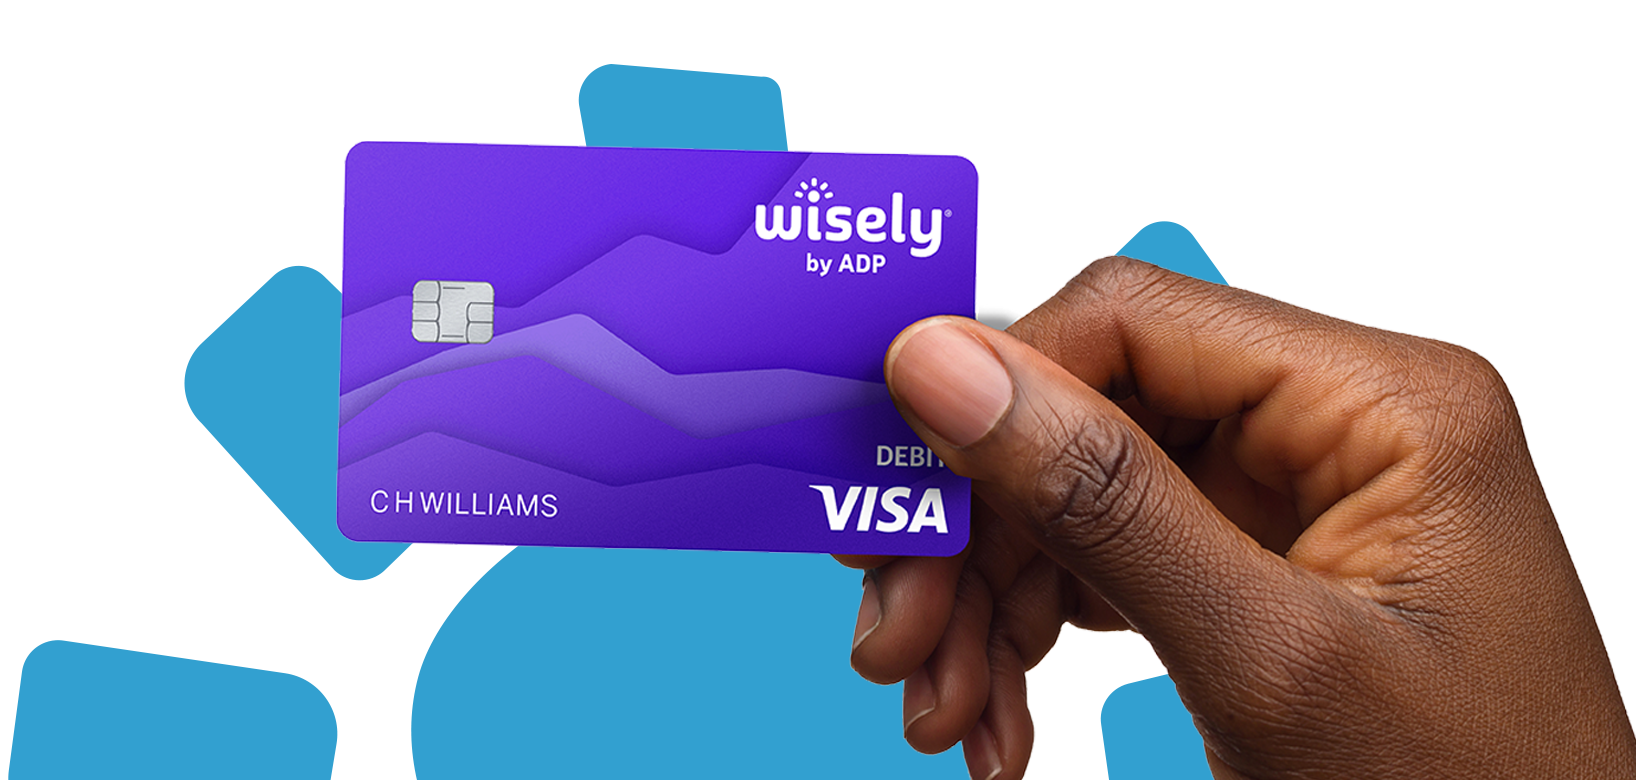 How to Activate Your Wisely Pay Card Online? – A Beginner’s Guide